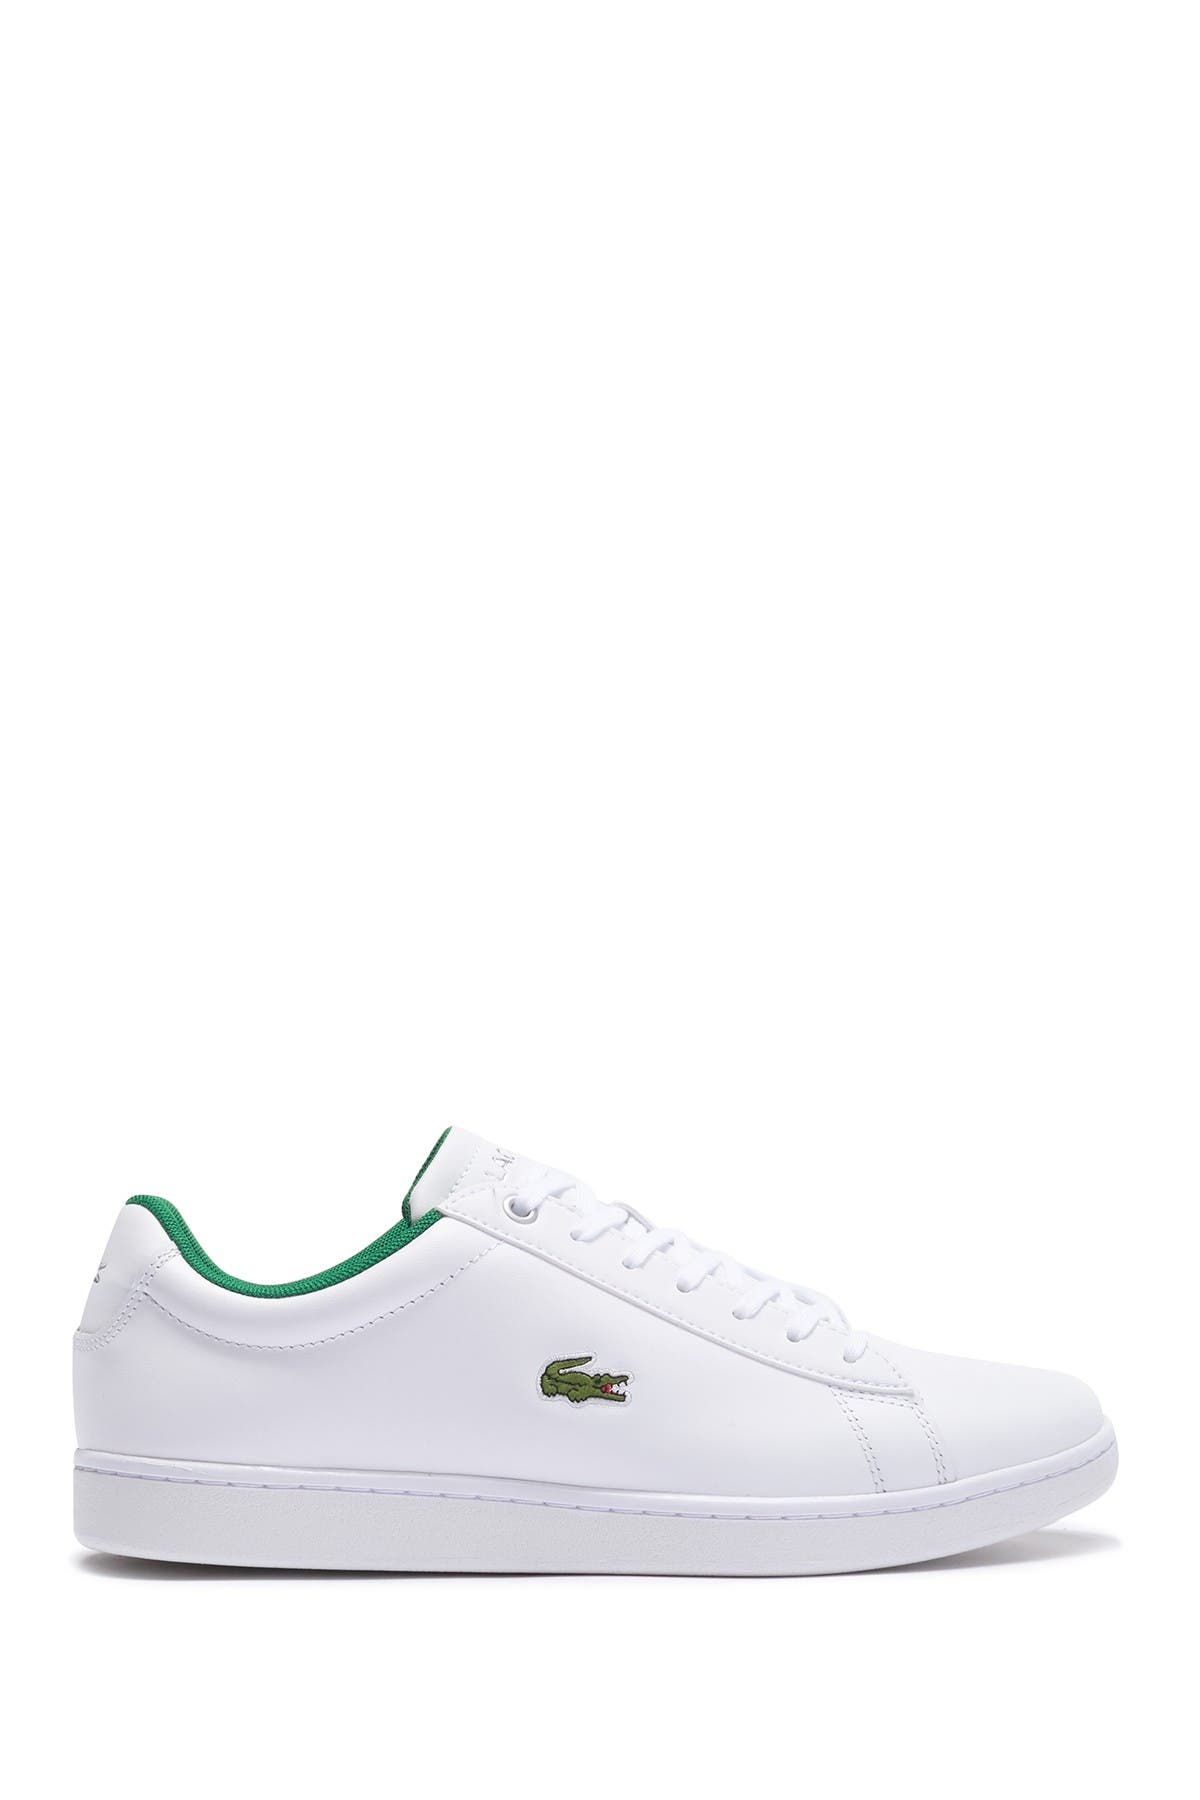 Lacoste | Hydez Leather Sneaker 